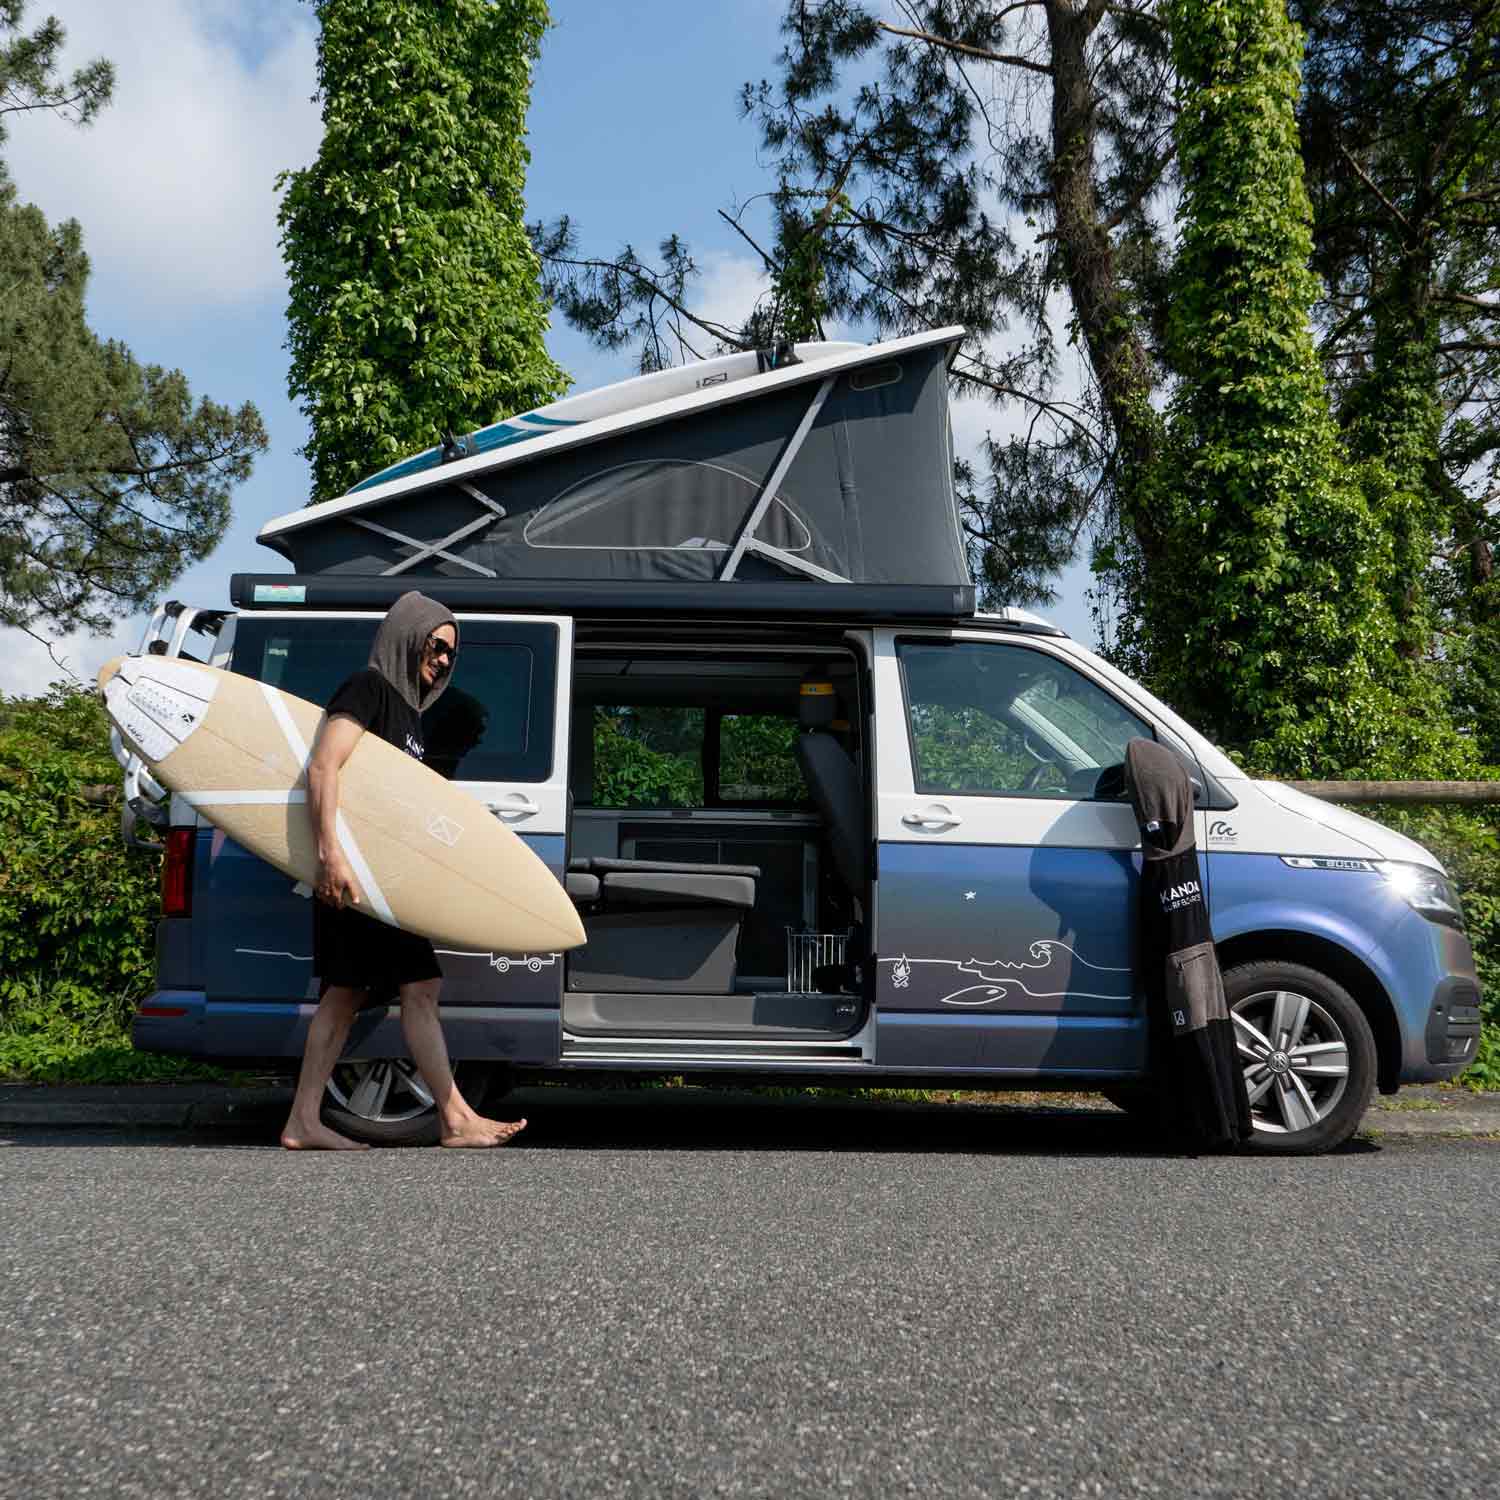 Seti Burling with our sustainable Polyola Surfboard in front of a Roadsurfer Van